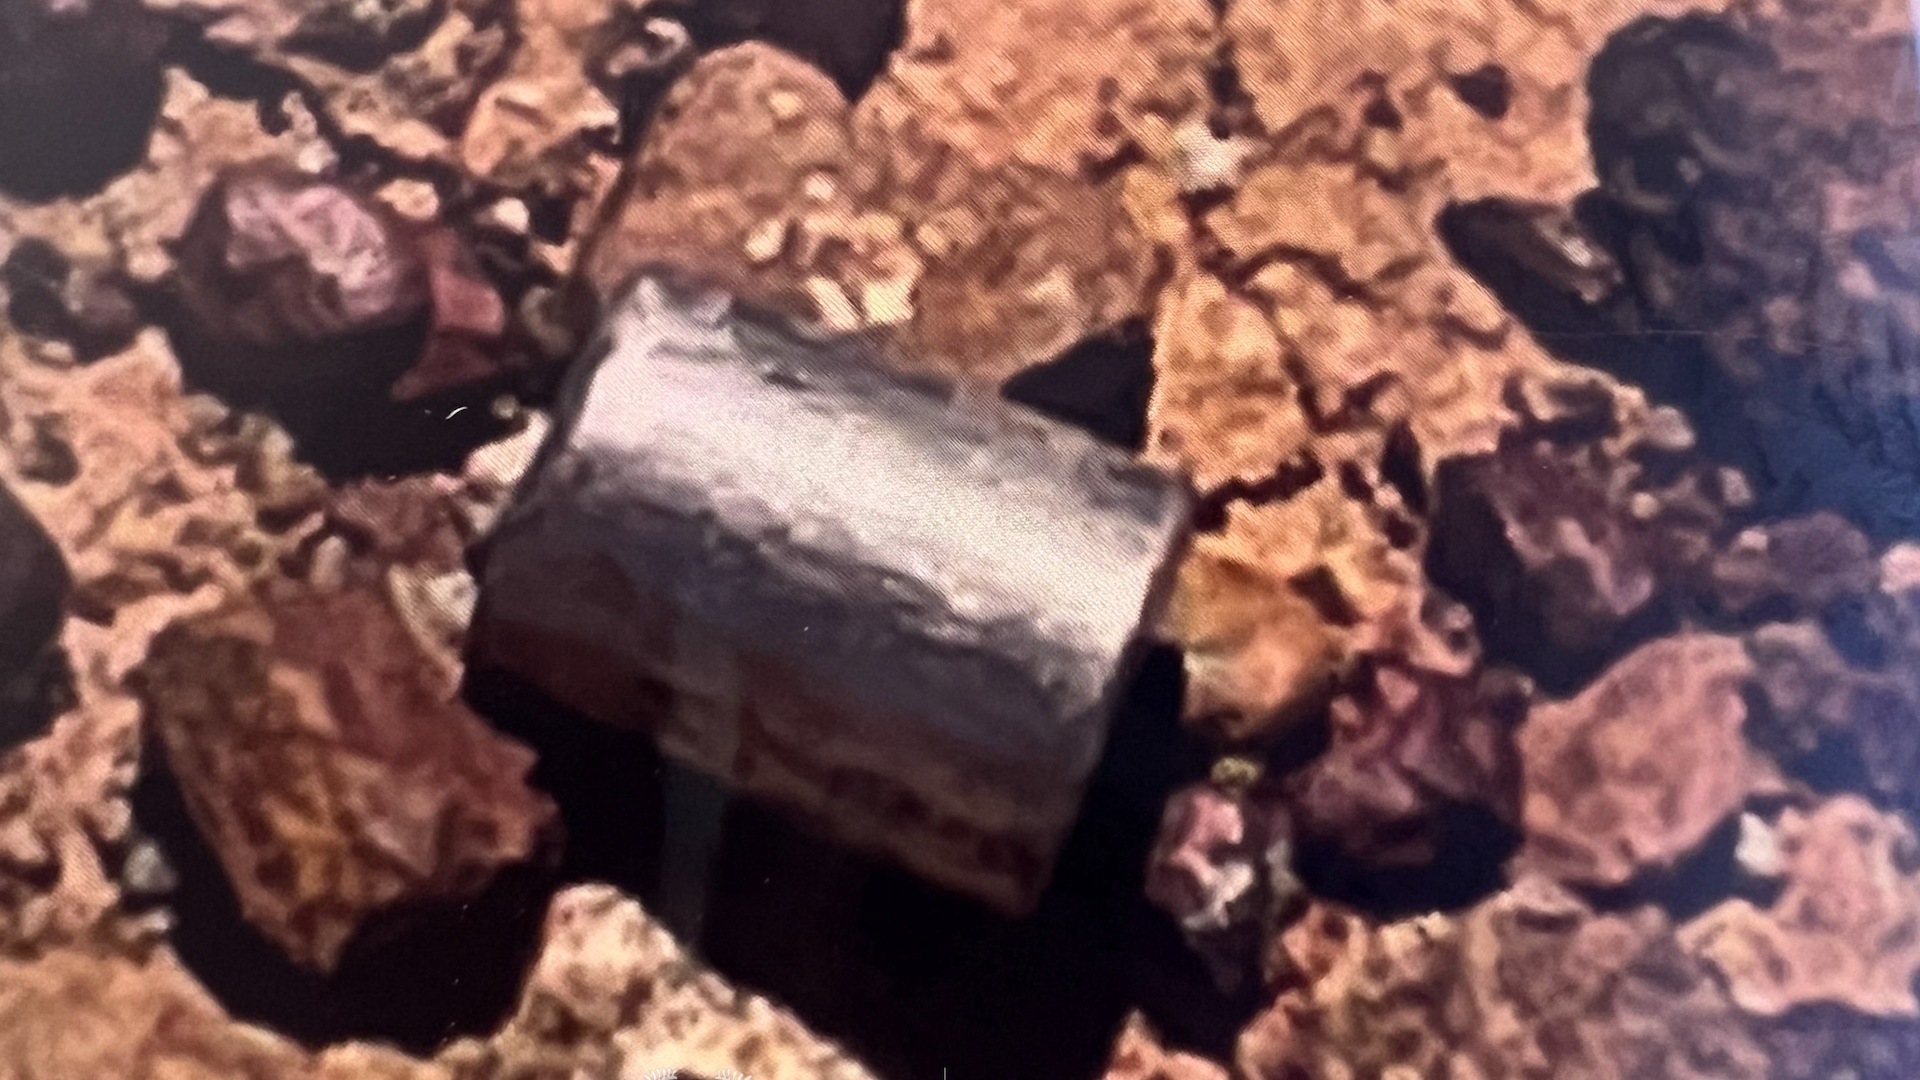 'Needle in the haystack': Missing radioactive capsule found on the side of the road in Australia